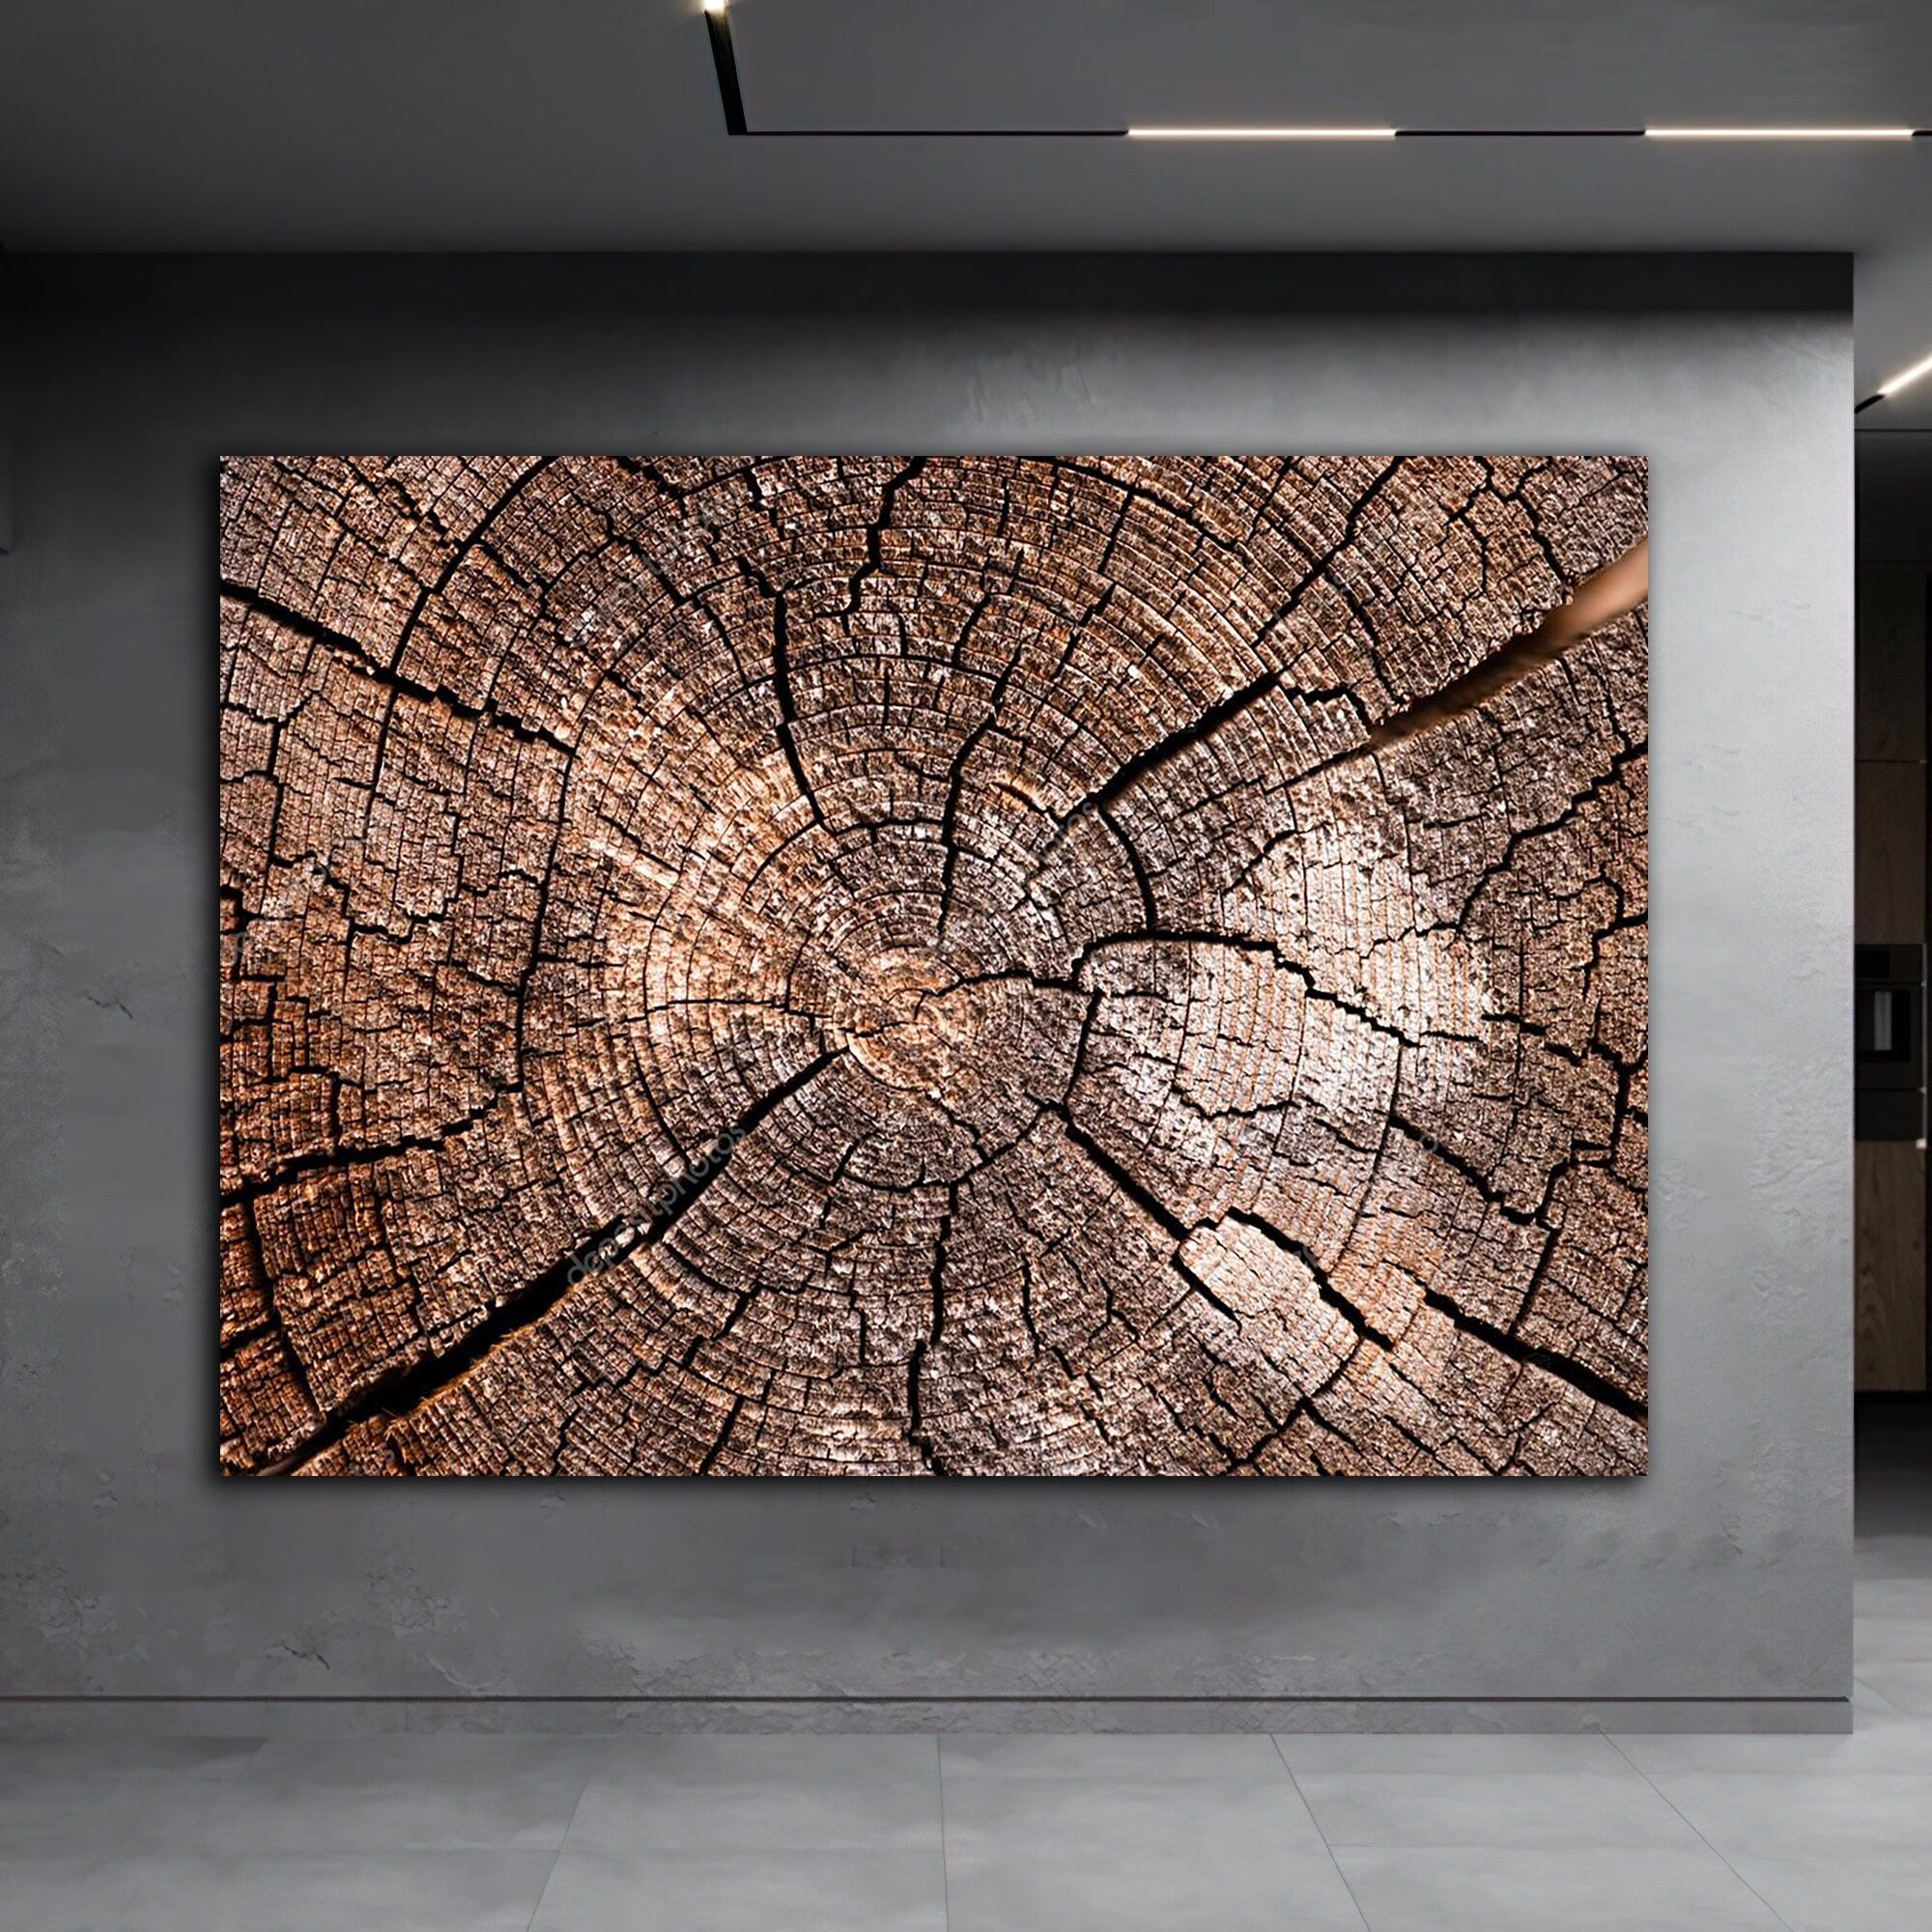 tree crack abstract canvas painting, wood look canvas painting, tree painting, cracks abstract canvas painting, wood pattern image painting Art Collection